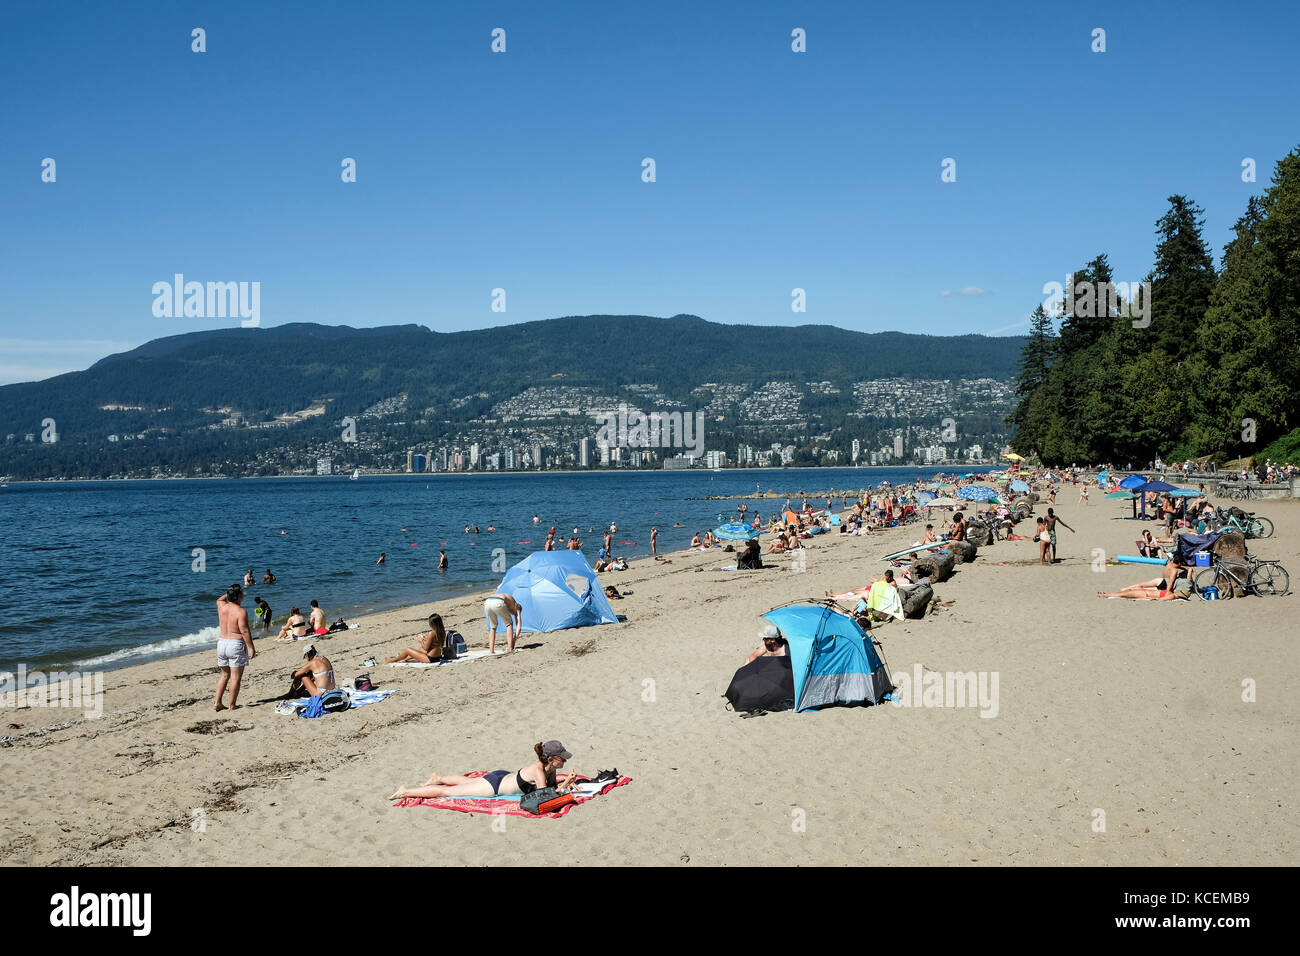 Third Beach on the coast of Stanley Park in Vancouver, British Columbia, Canada Stock Photo